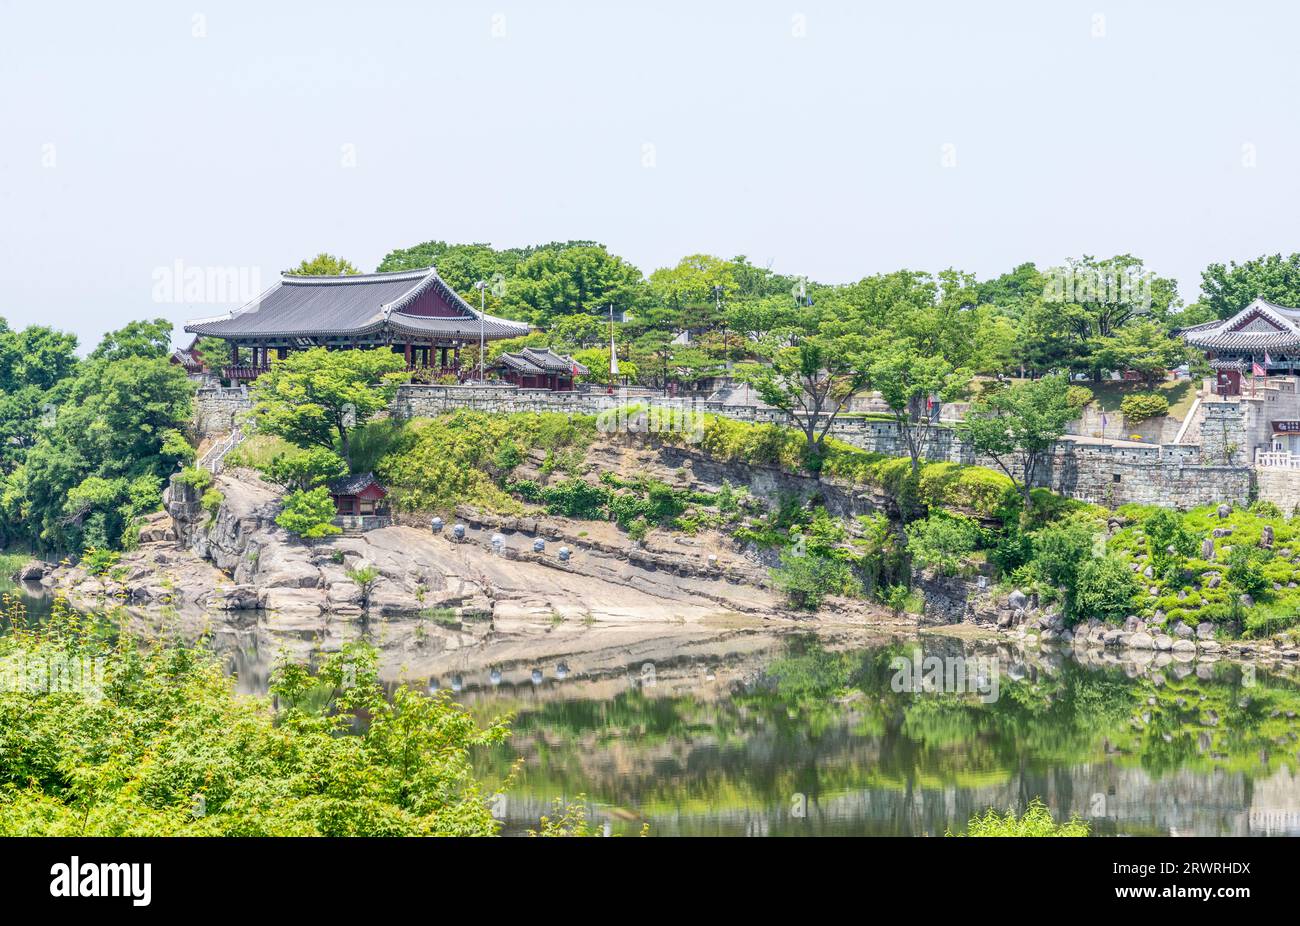 Jinjuseong Fortress, a famous tourist attraction in Korea Stock Photo